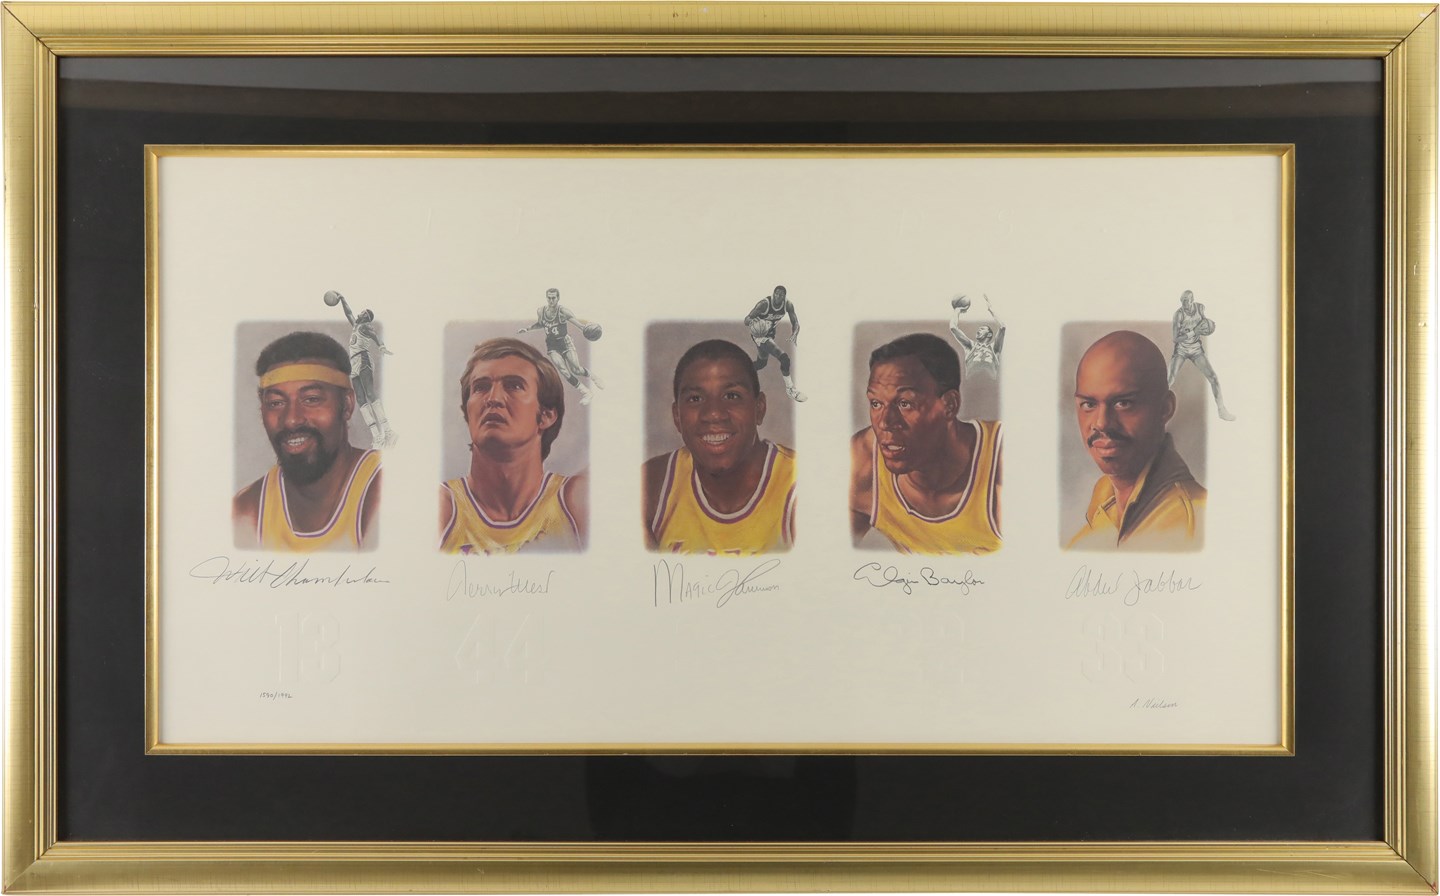 - Los Angeles Lakers "Legends" Signed Limited Edition Lithograph